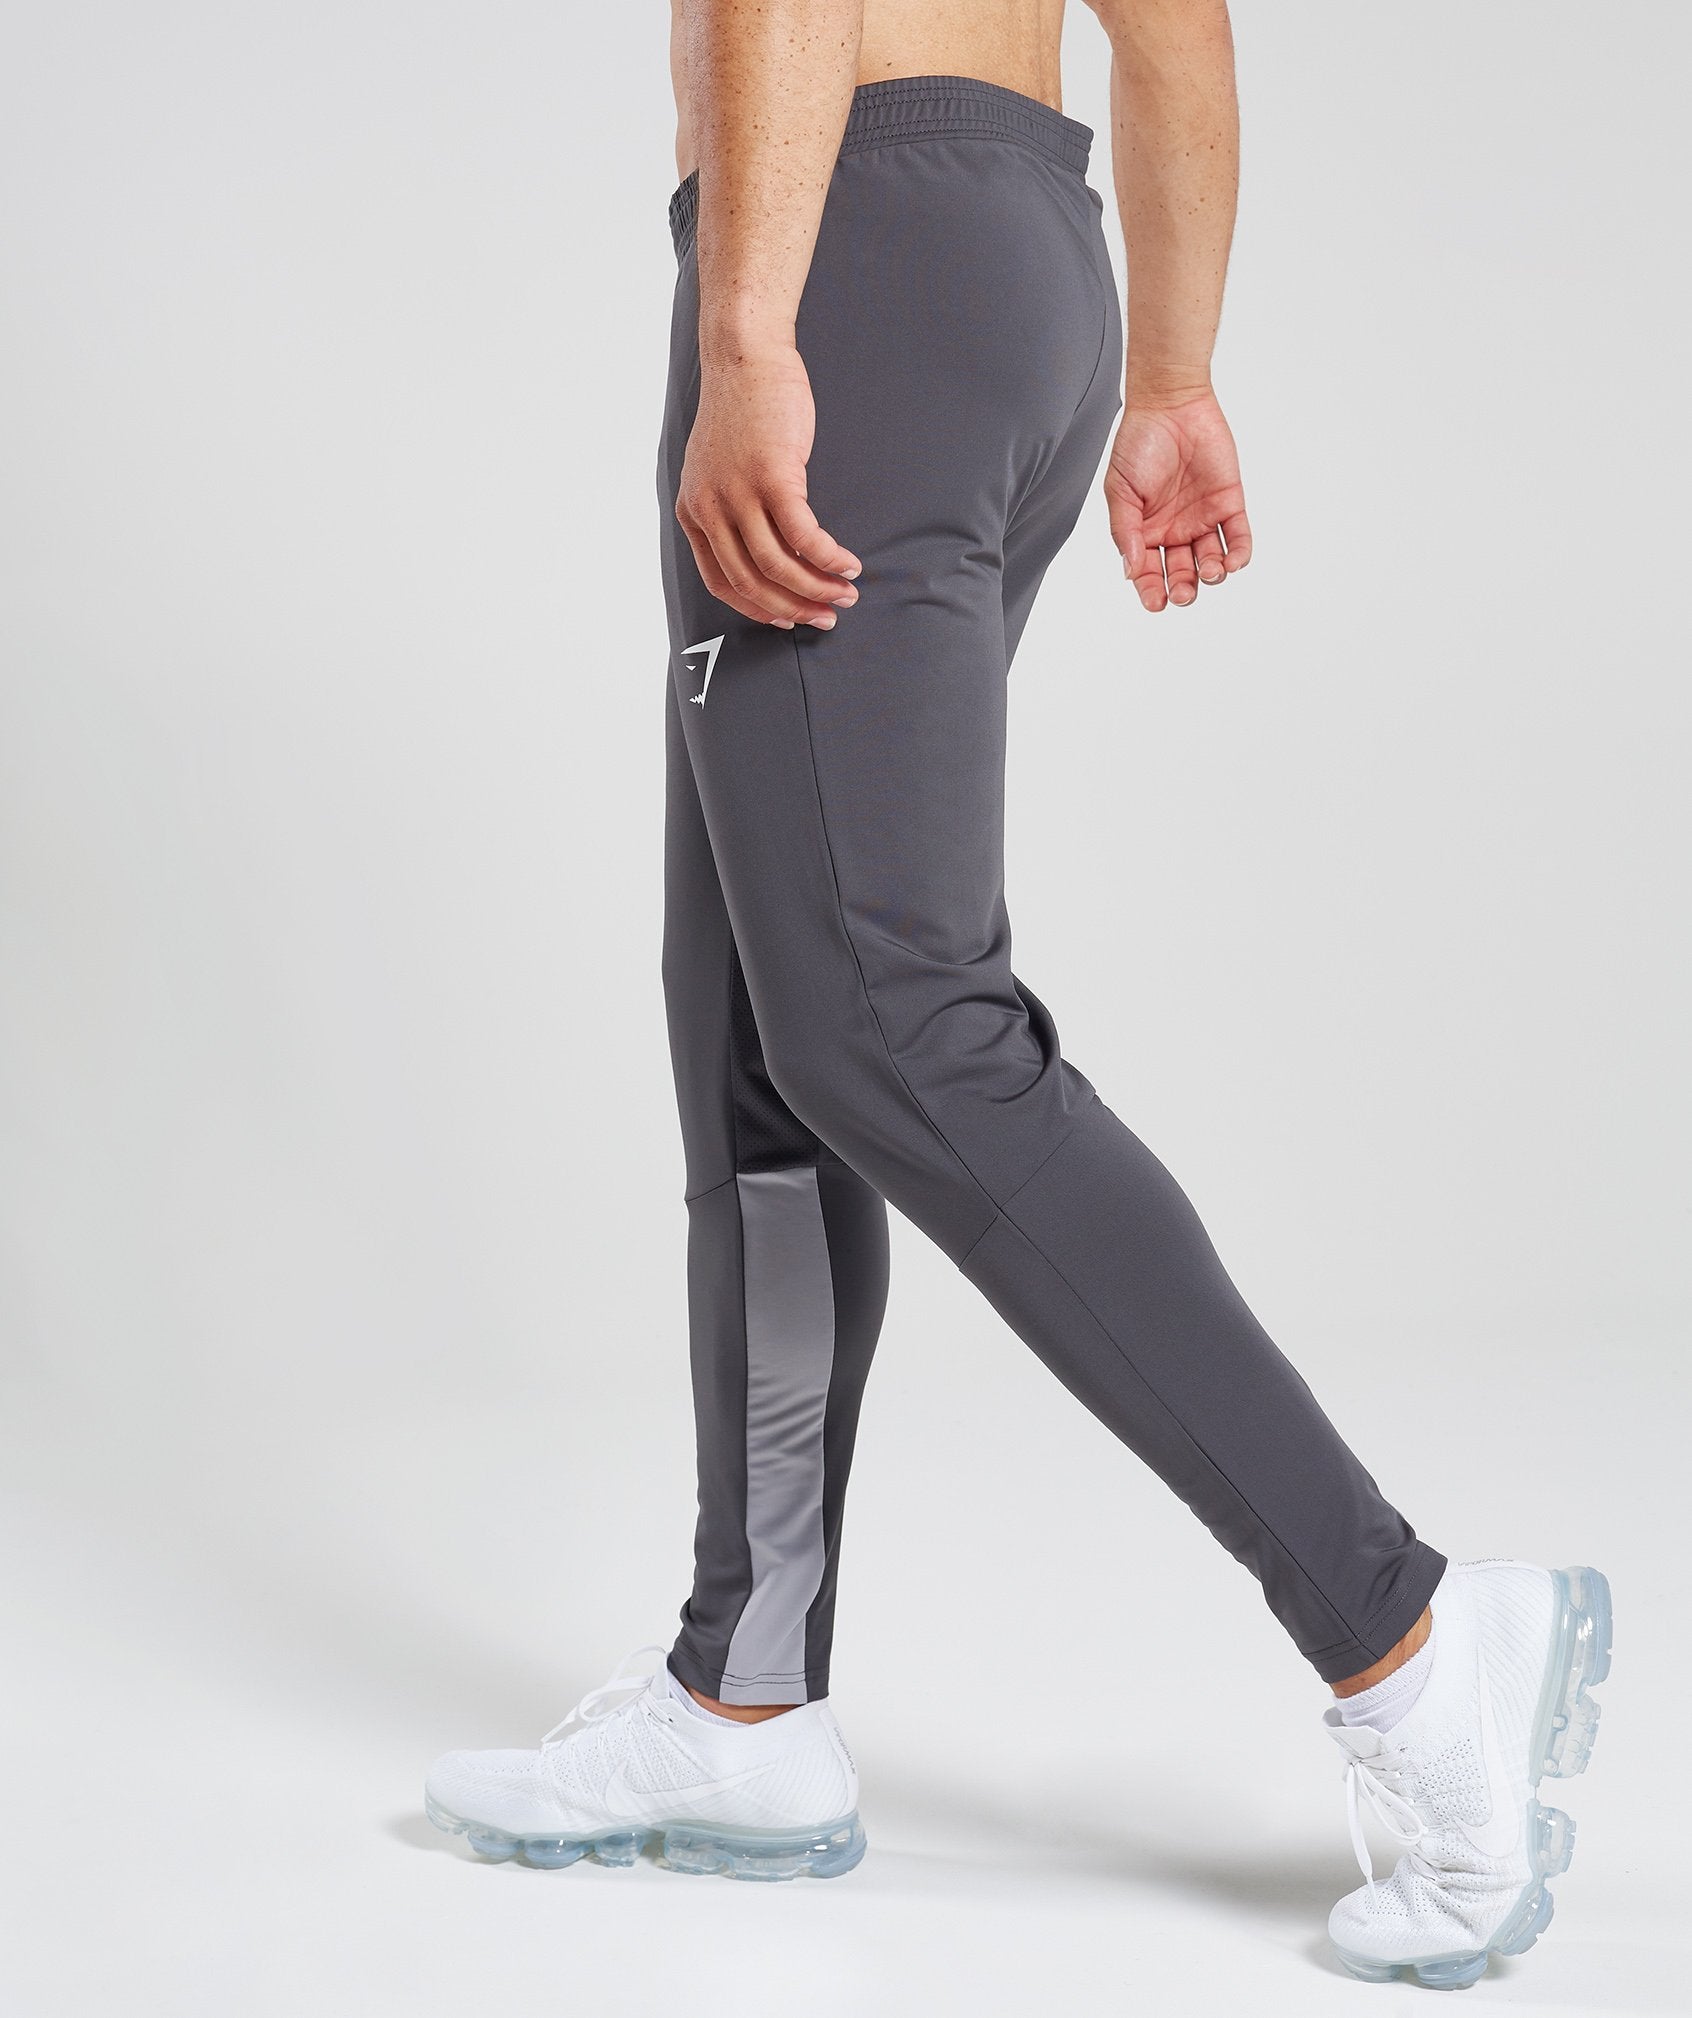 Reactive Training Bottoms in Charcoal/Light Grey - view 3